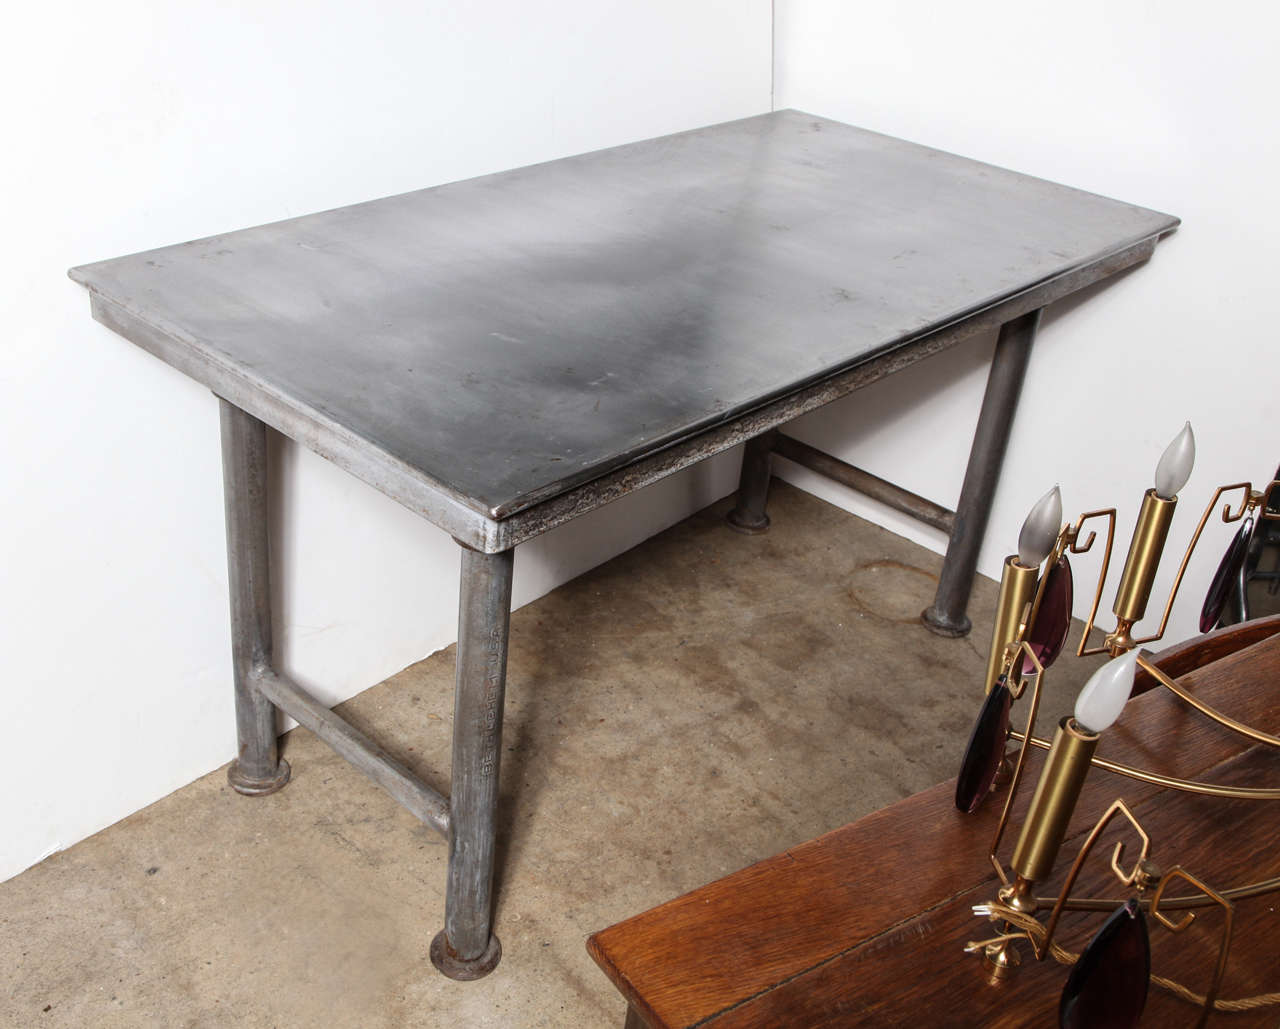 Heavy Steel textile work Table with heavy duty joints, round legs and 2 horizontal end supports.  Great multi - use piece.  Fantastic Table for Kitchen, Dining, Serving or Display.  Also good as Desk or HDTV stand.  With levelers; restored, paint